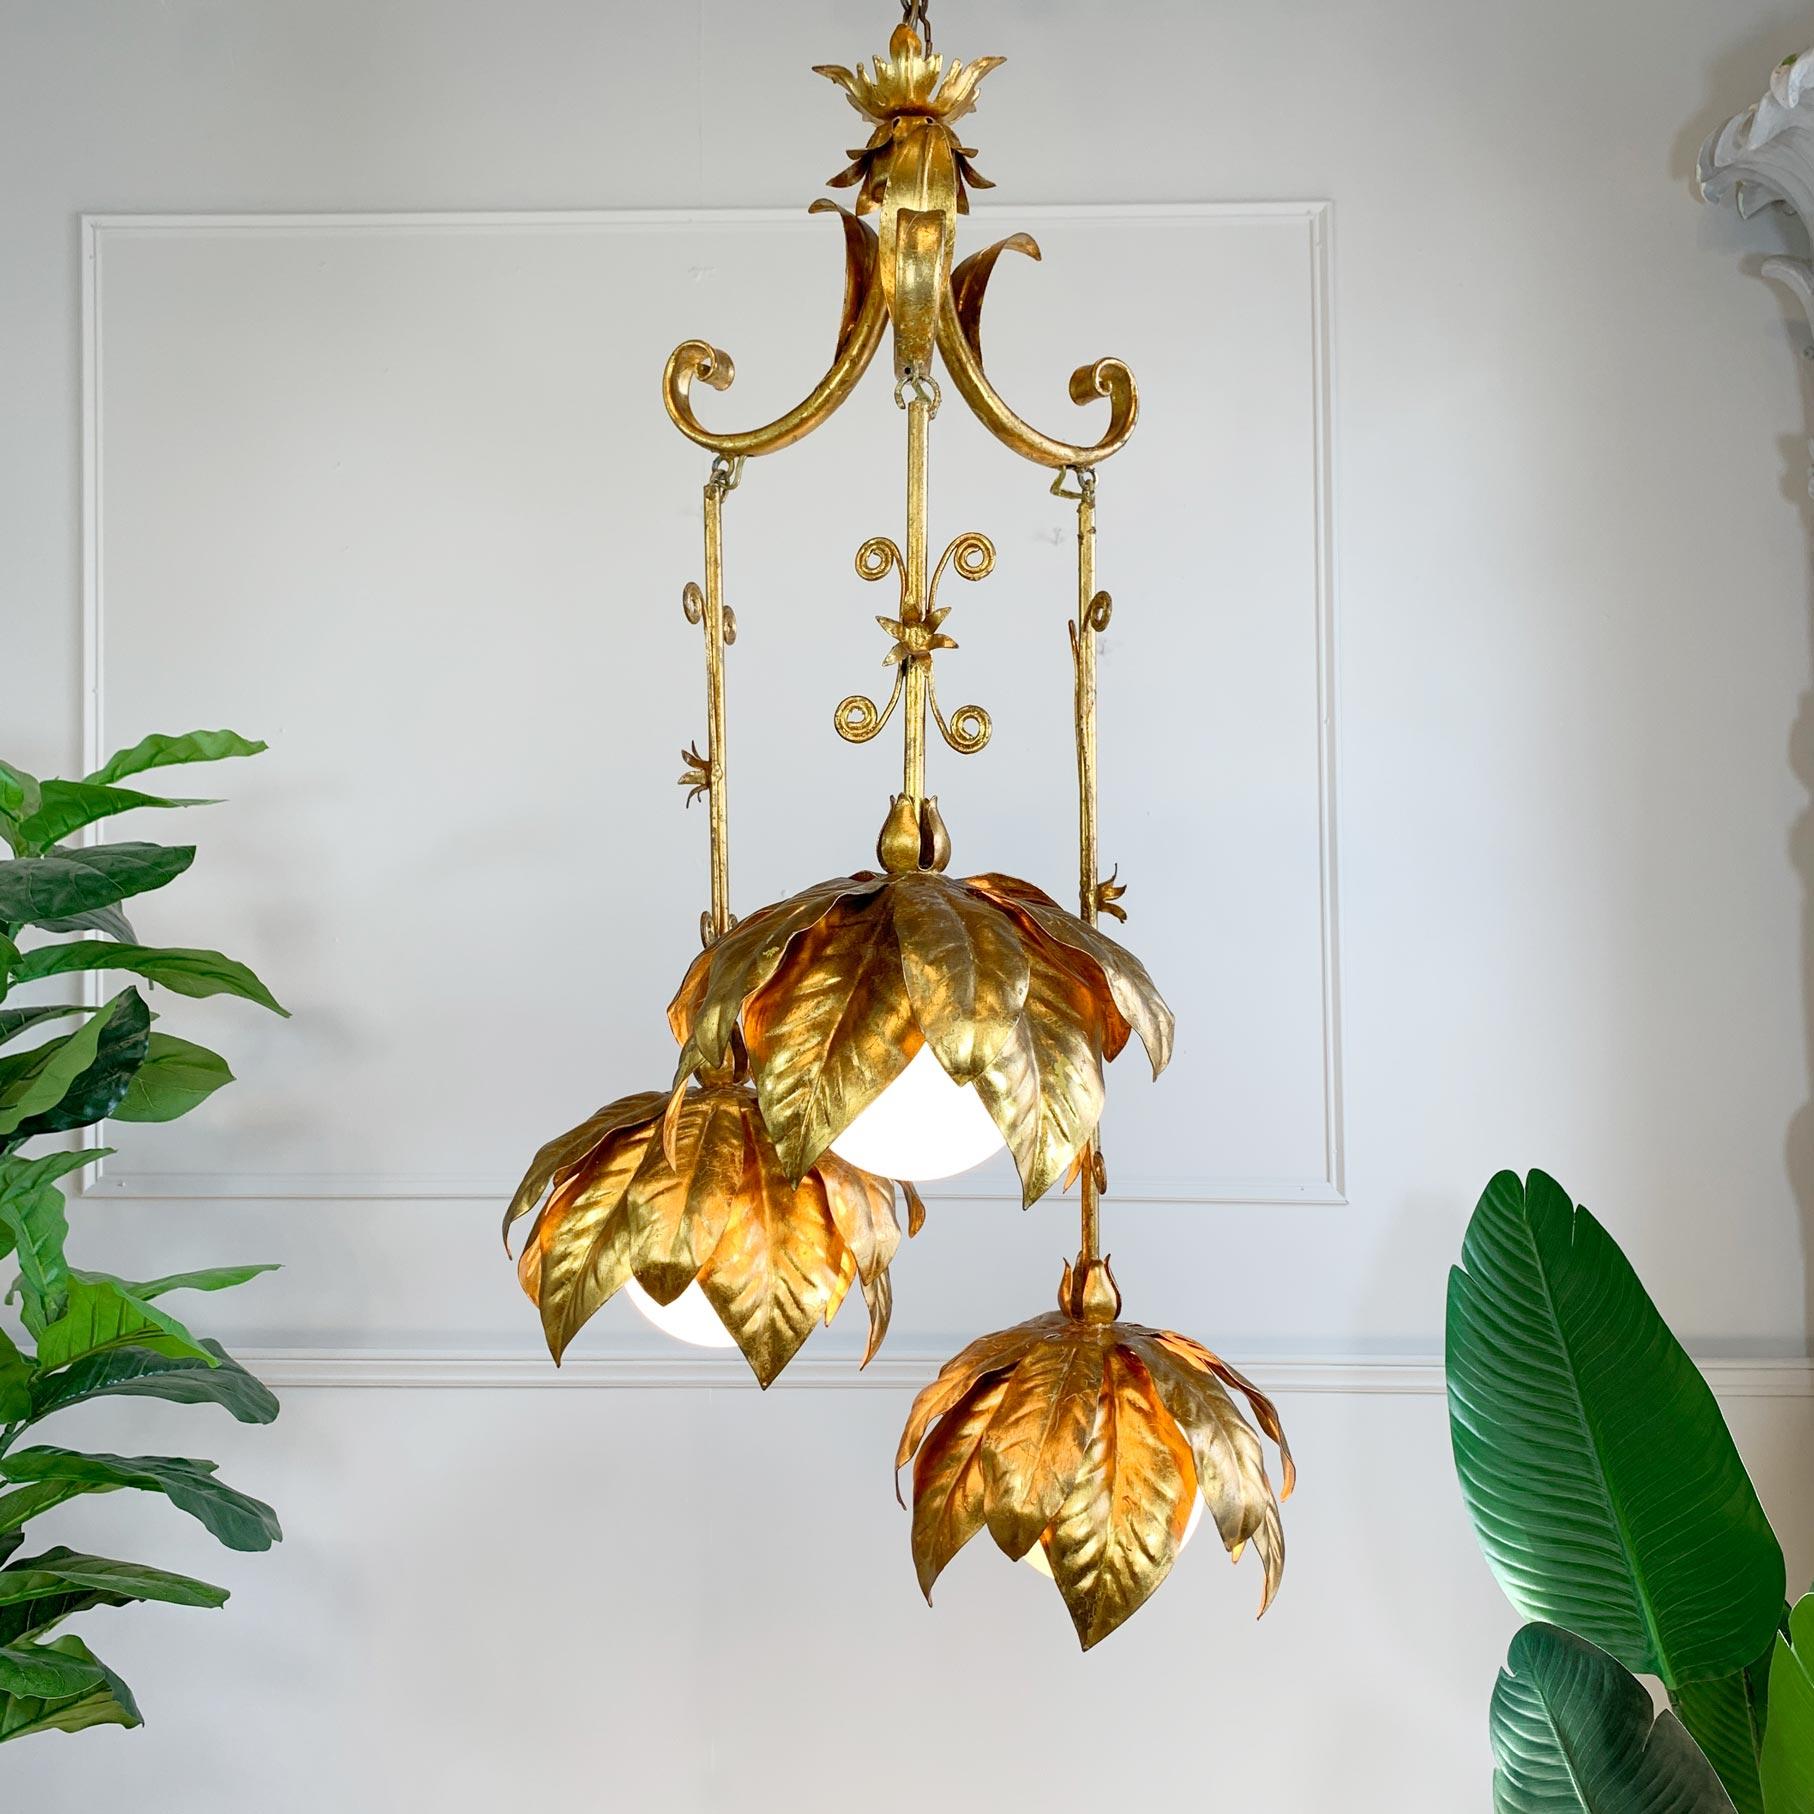 Beautifully decorative and very rare, gold leaf gilt Banci Firenze triple pendant light, in the form of large flower heads, the three e14 lamp holders sit behind opaque glass globes.

Made by the world renowned design house Banci Firenze, Italy,